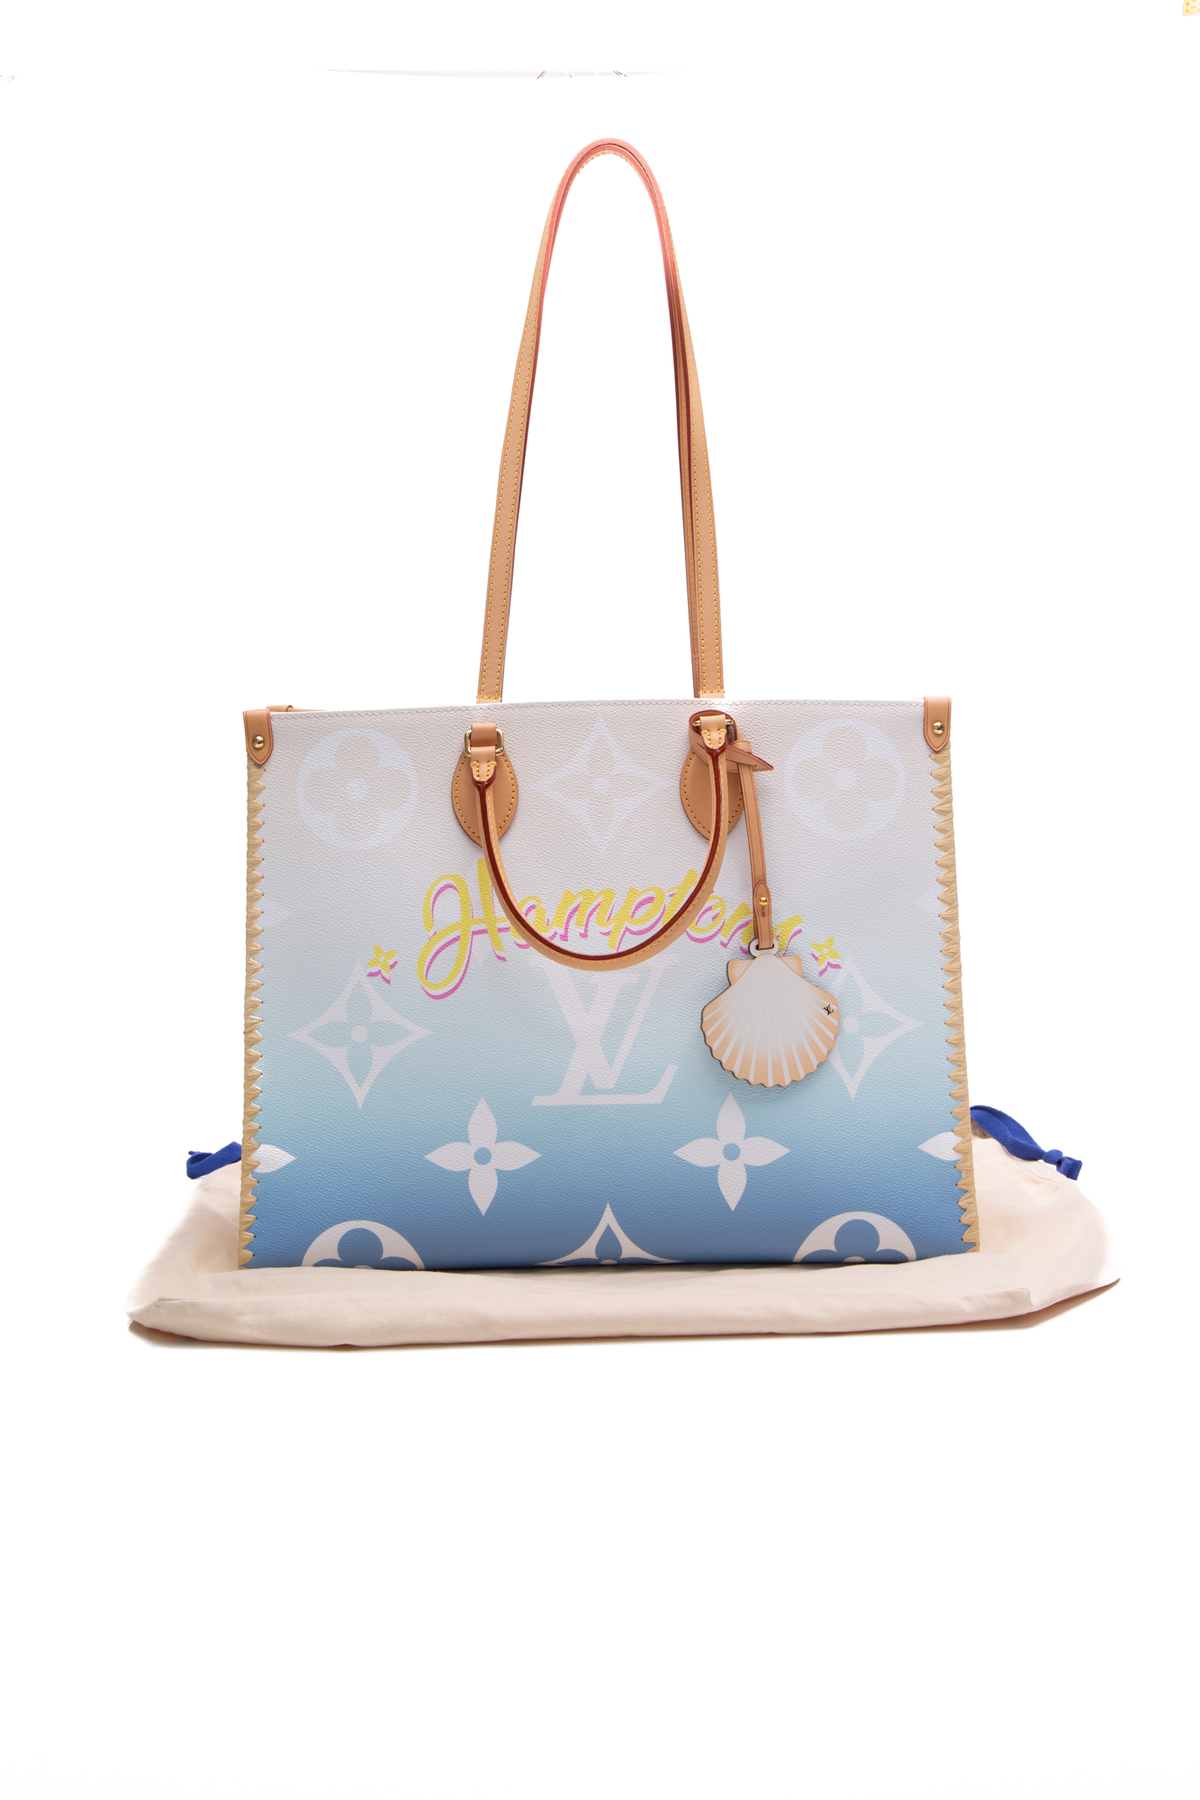 Louis Vuitton By the Pool Onthego GM Blue Giant Monogram Canvas